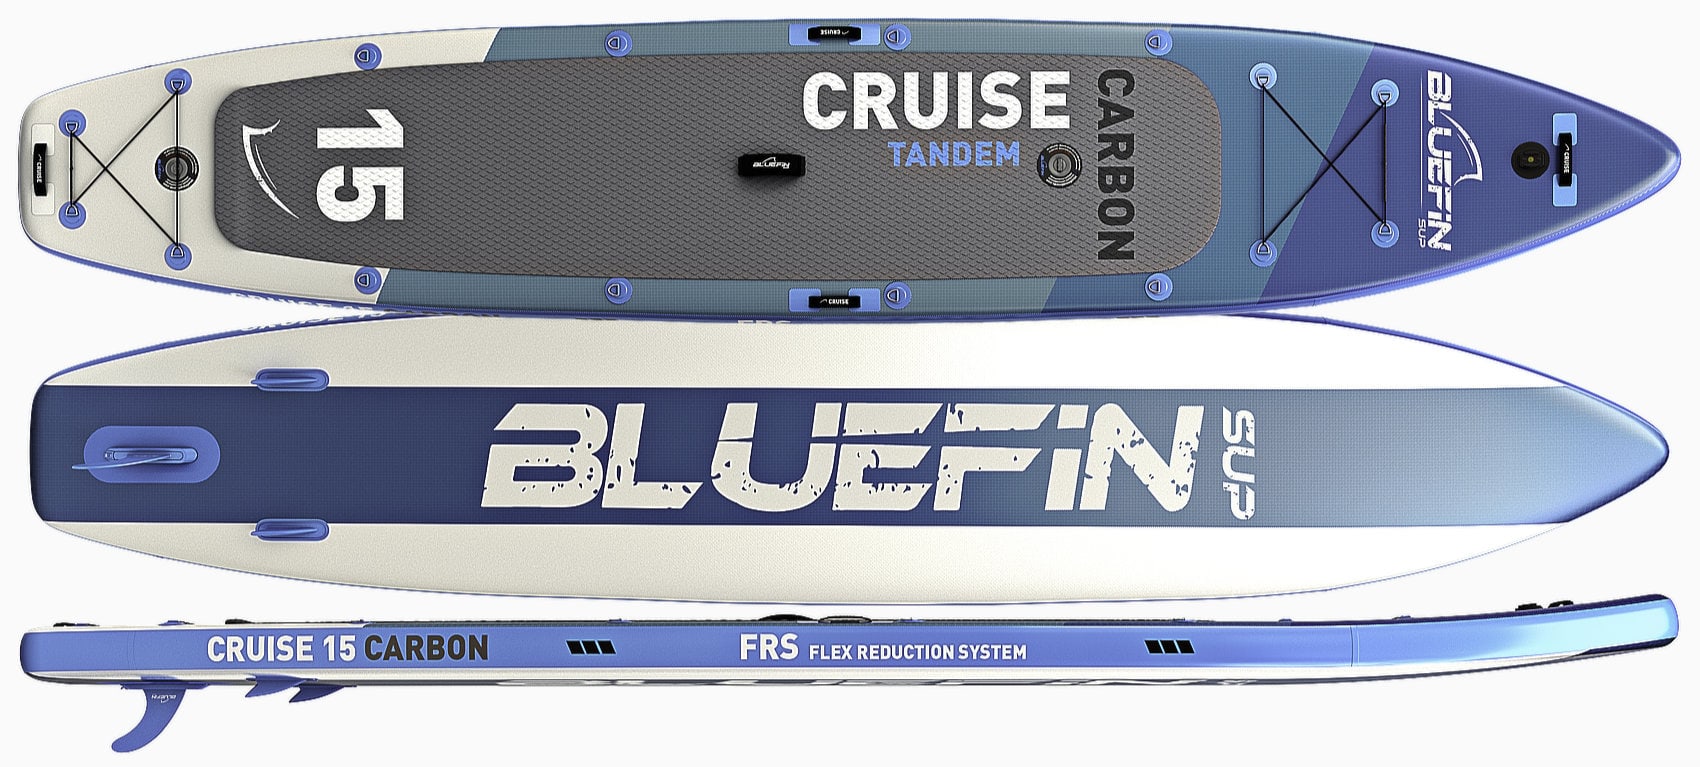 Bluefin SUP Cruise Carbon 15' Review